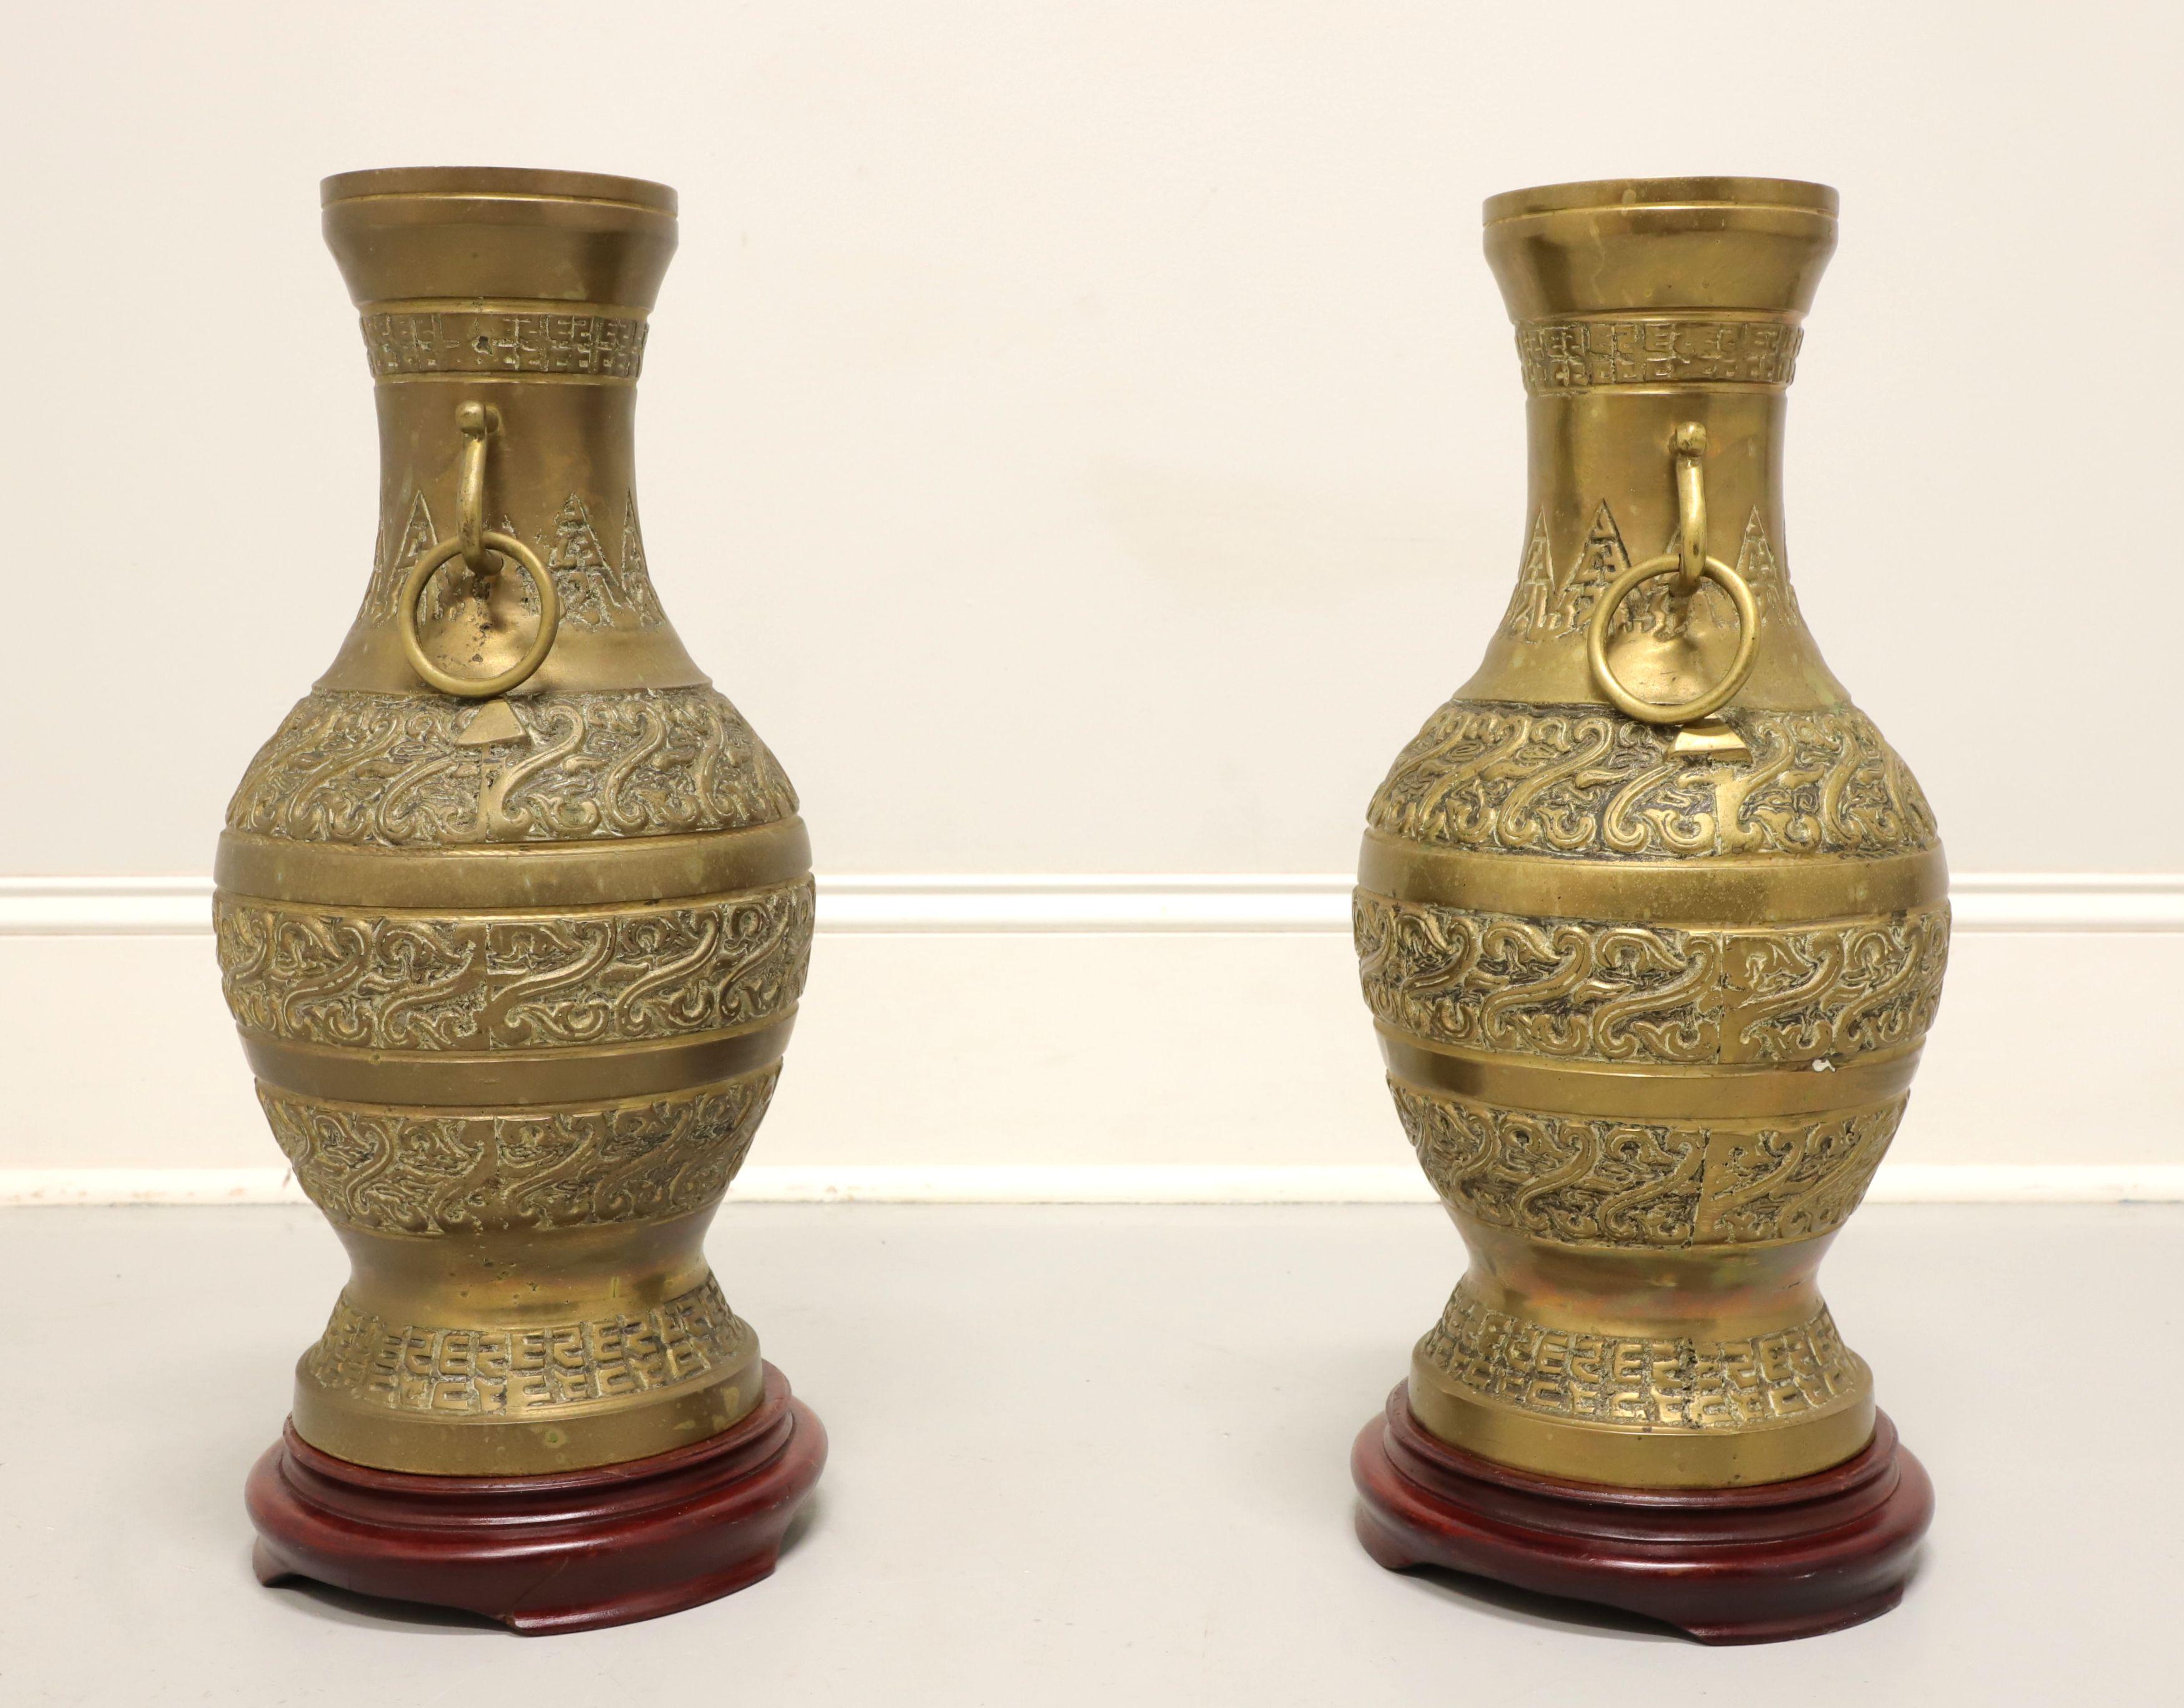 A pair of Asian style decorative brass urns, unbranded. Solid brass, hollow constructed, urns are decoratively adorned, have handles with rings and sit on unattached wood bases. Decorative use. Origin unknown, likely Asia, from the mid 20th Century.